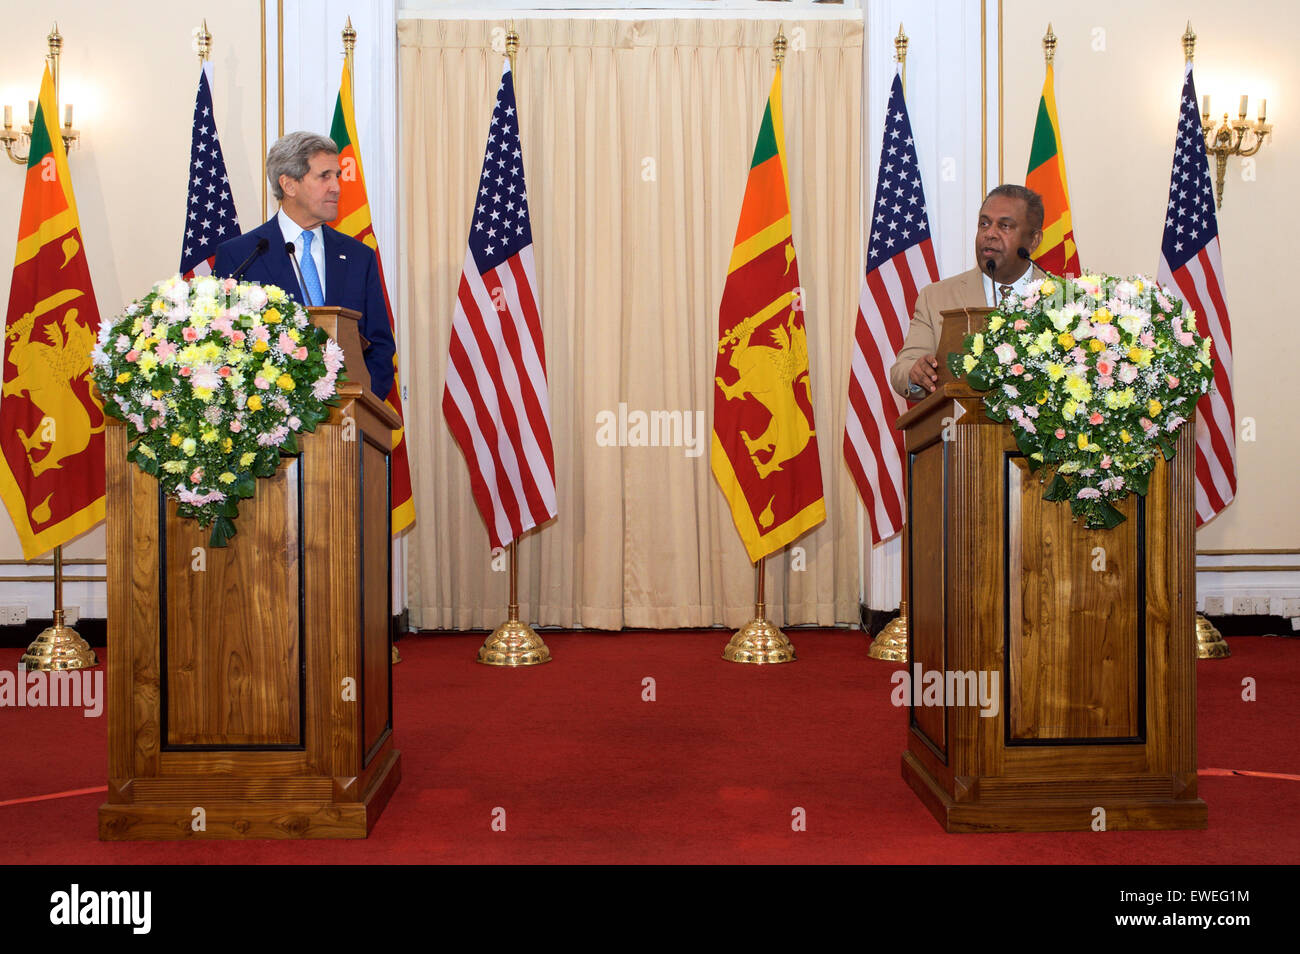 U.S. Secretary of State John Kerry listens as Sri Lankan Foreign Minister Mangala Samaraweera makes a statement to reporters assembled at the Ministry of Foreign Affairs in Colombo, Sri Lanka, on May 2, 2015, before the Secretary with President Maithripala Sirisena and Prime Minister Ranil Wickremesinghe. Stock Photo